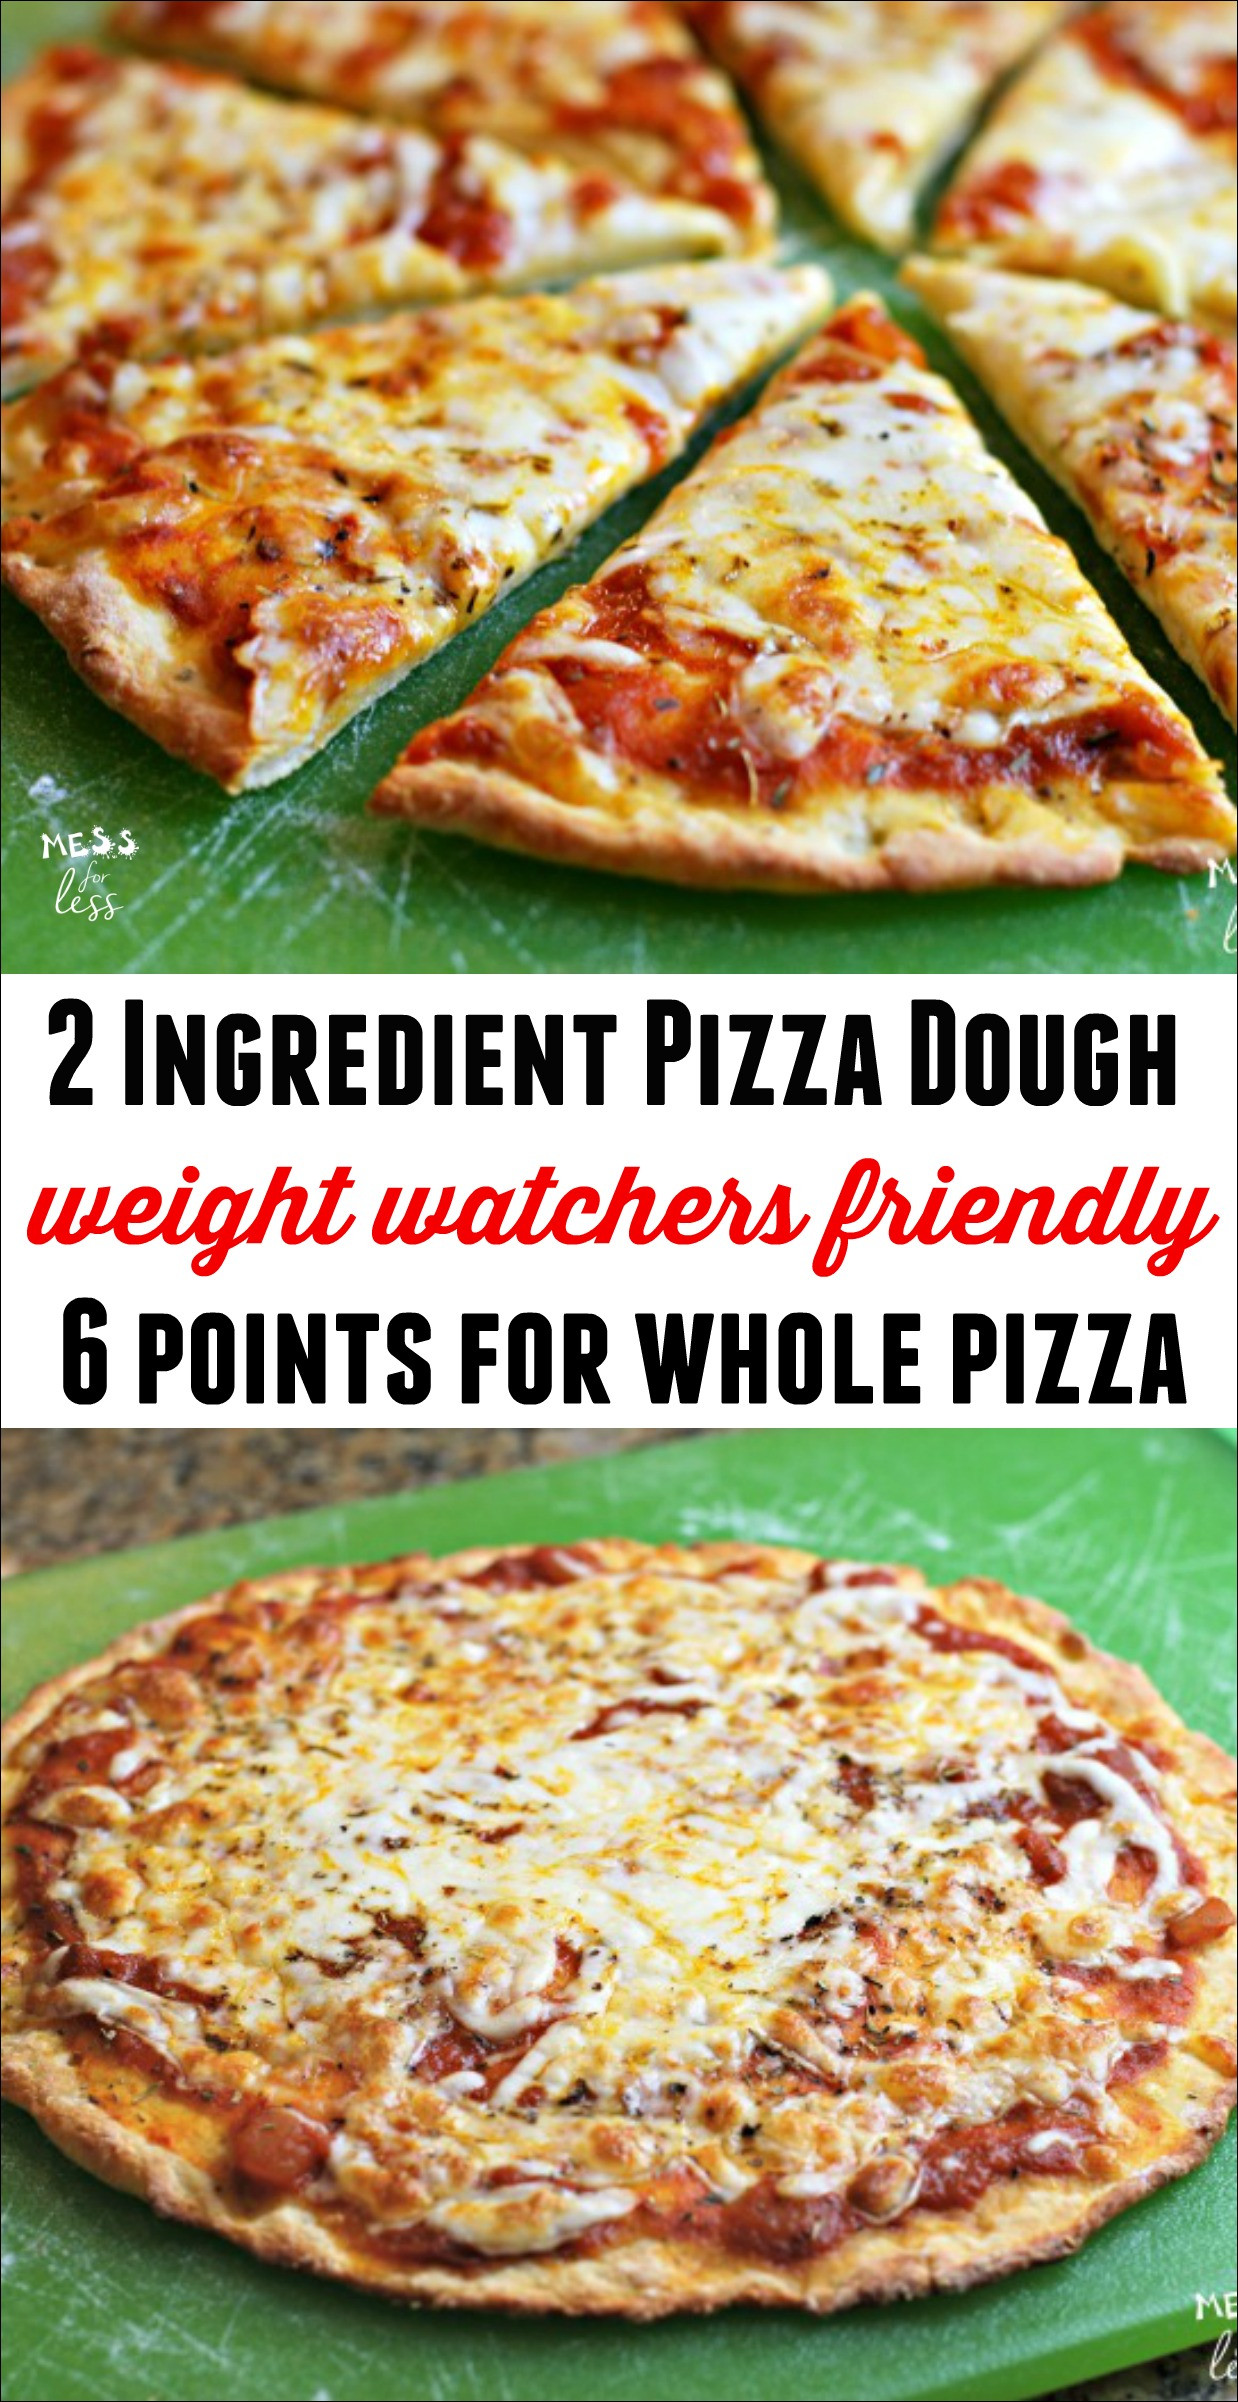 Weight Watchers Pizza Dough
 Two Ingre nt Pizza Dough Mess for Less